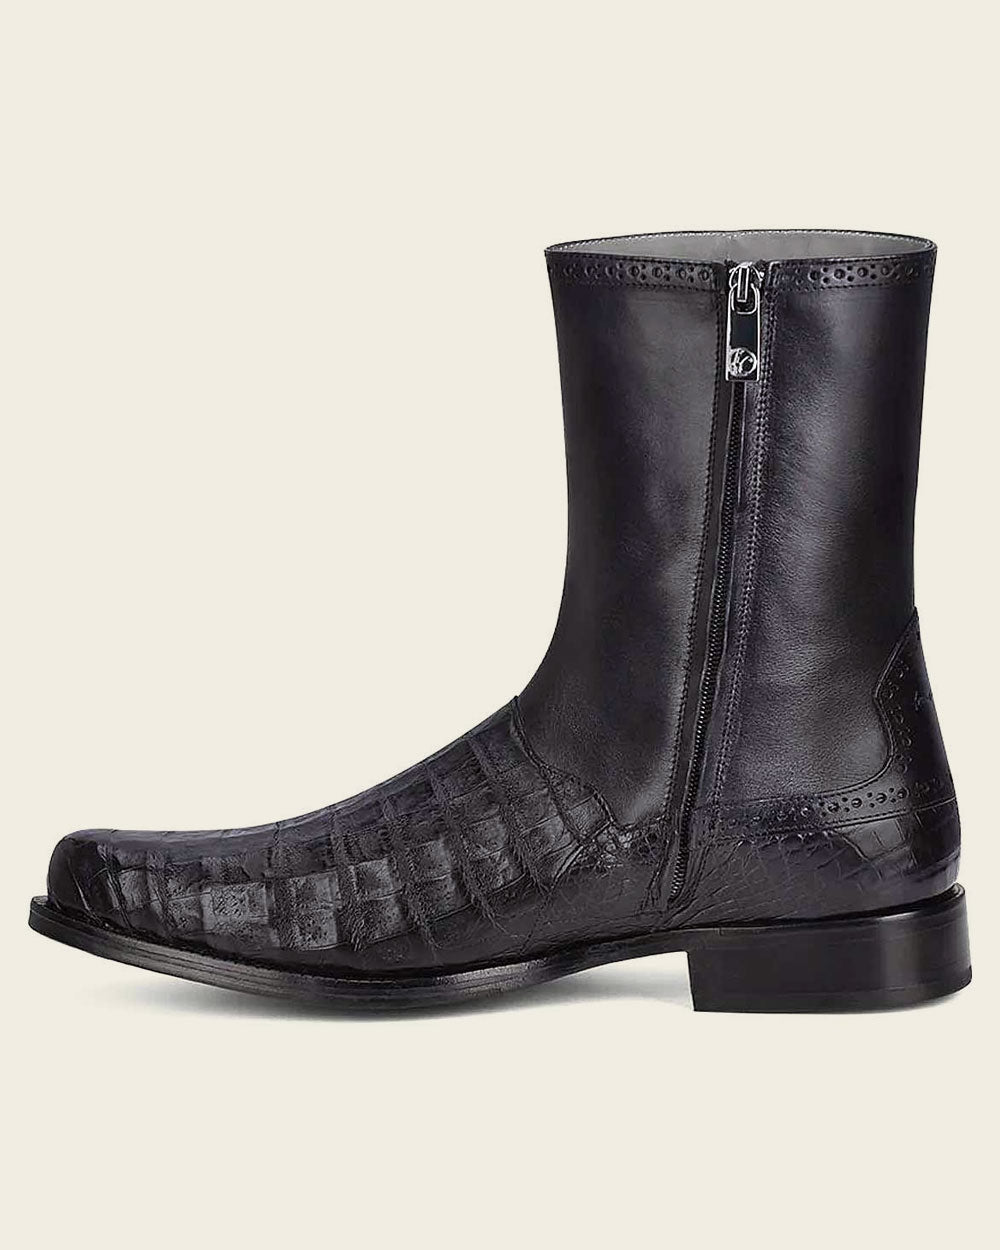 Black leather boots: Embrace sophistication & comfort with Cuadra.